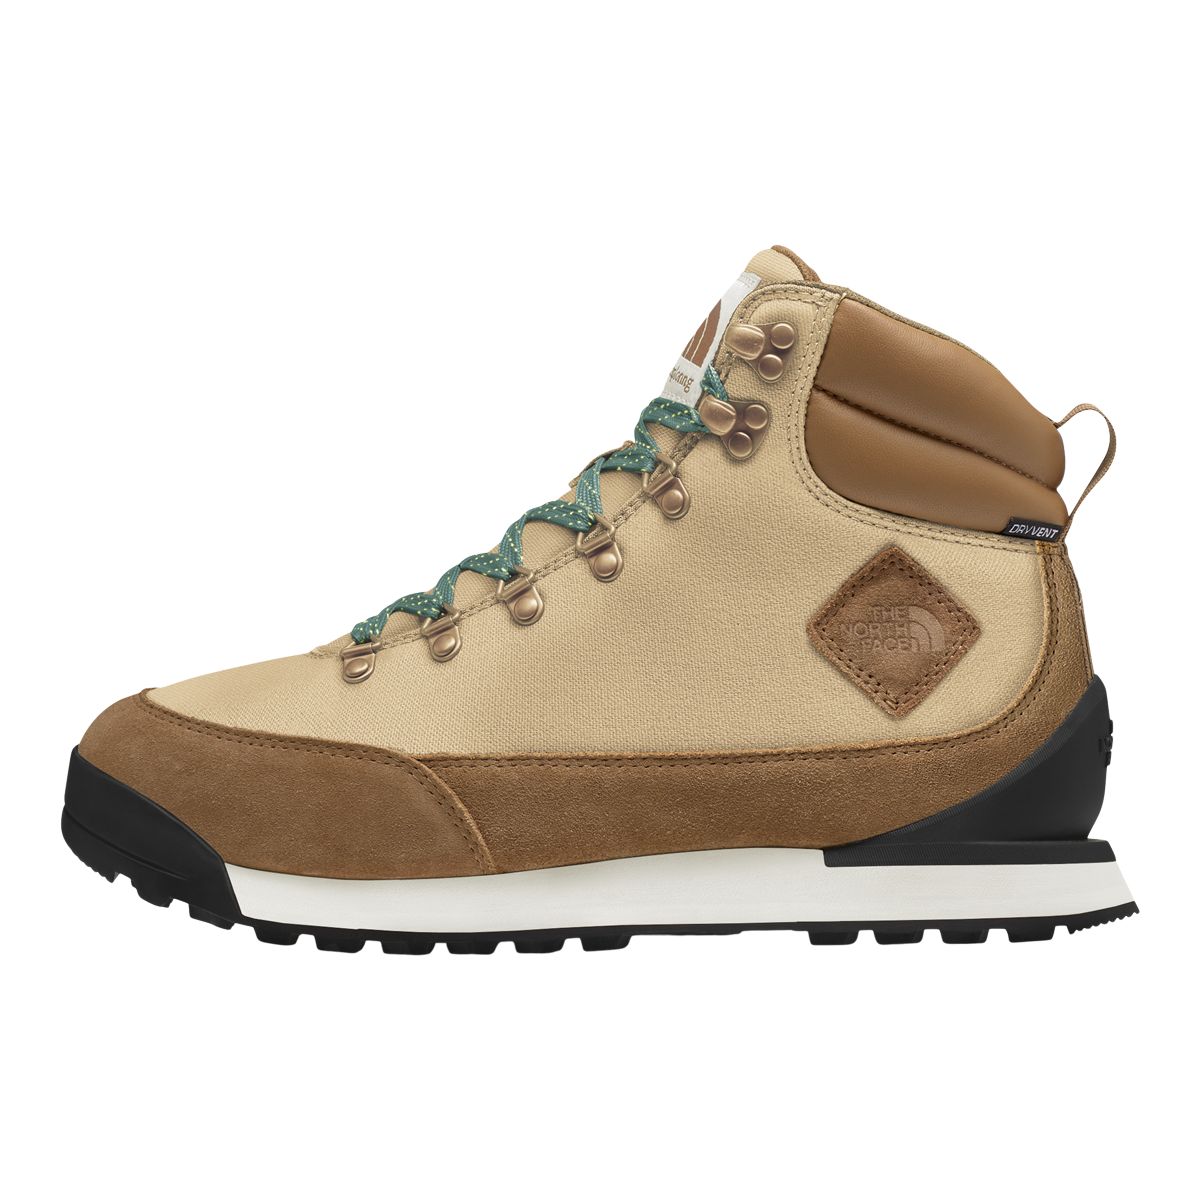 Image of The North Face Women's Back-To-Berkeley IV Waterproof Boots